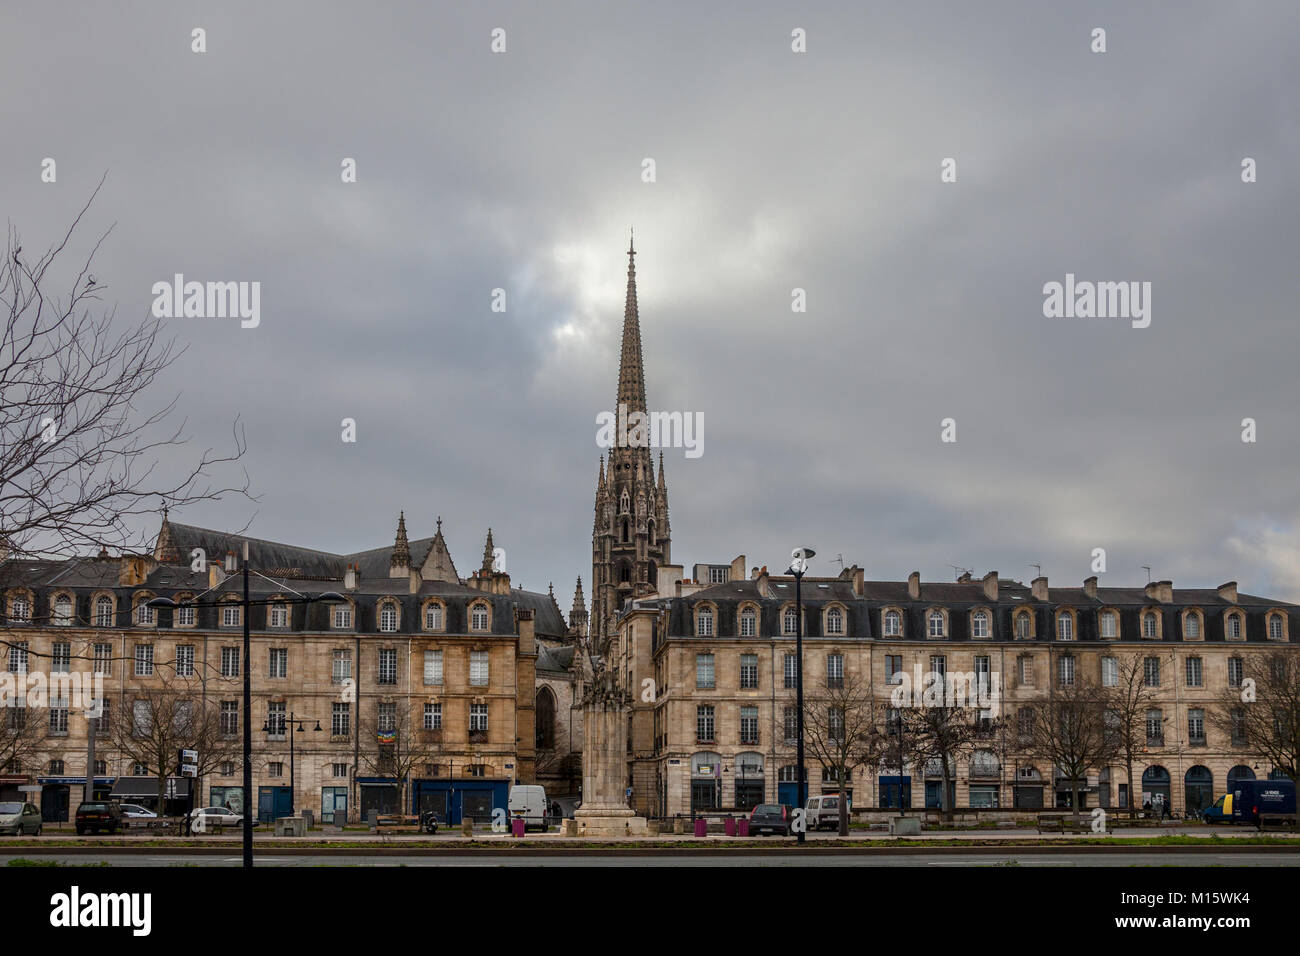 BORDEAUX, FRANCE - DECEMBER 24, 2017: St Michel Basilica (Basilique Saint Michel) with its iconic tower in the city center of Bordeaux. This gothic ch Stock Photo